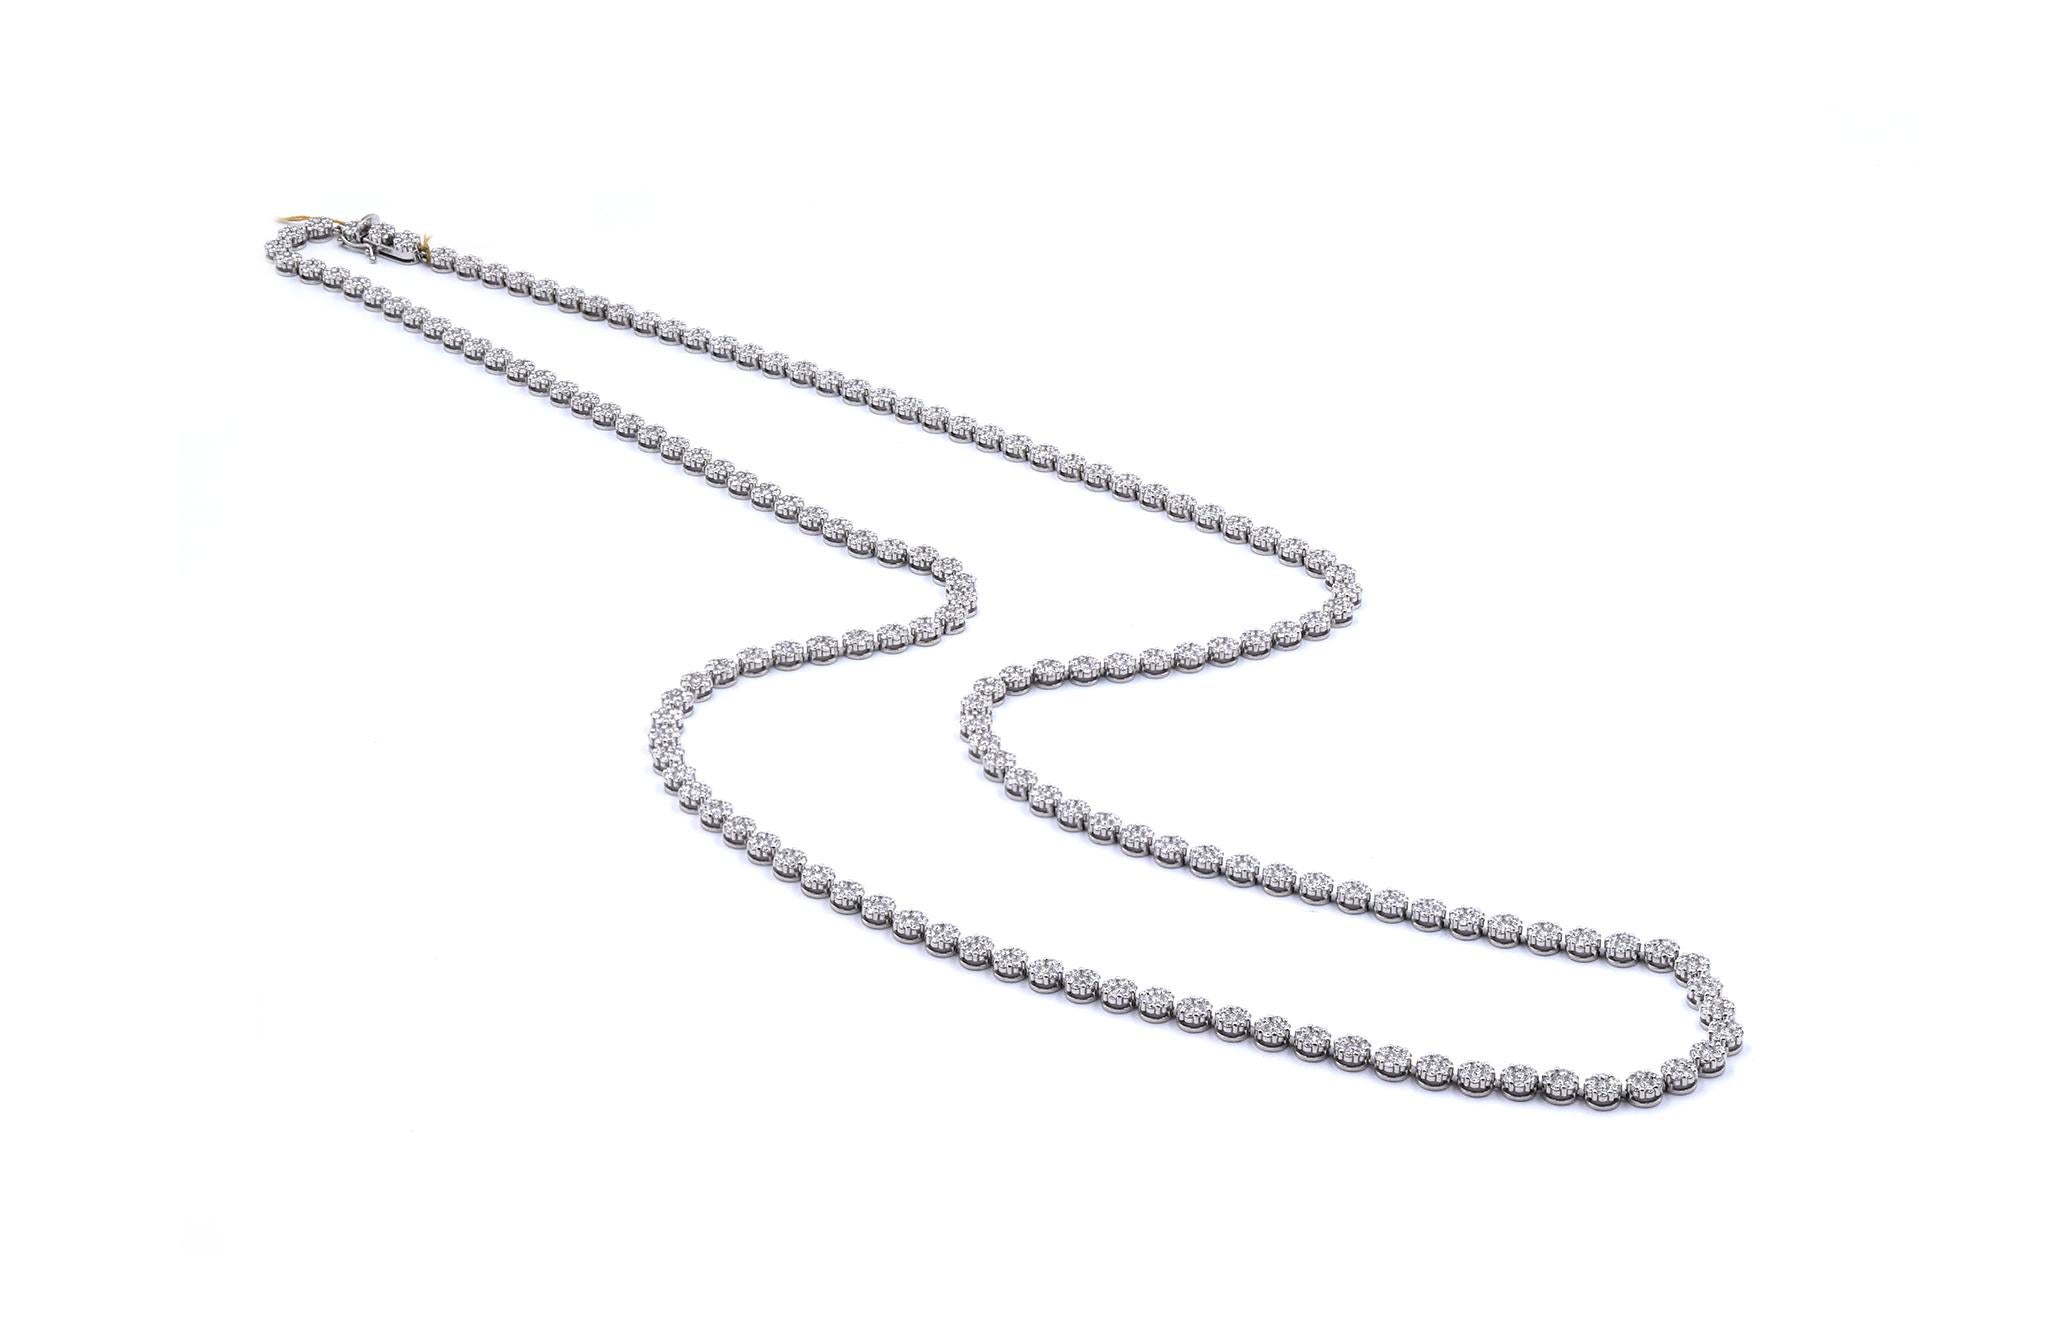 Designer: custom
Material: 18K white gold
Diamonds: 110 round cut =27.36cttw
Color: G
Clarity: VS
Dimensions: necklace measures 38-inches in length
Weight: 61.57 grams
